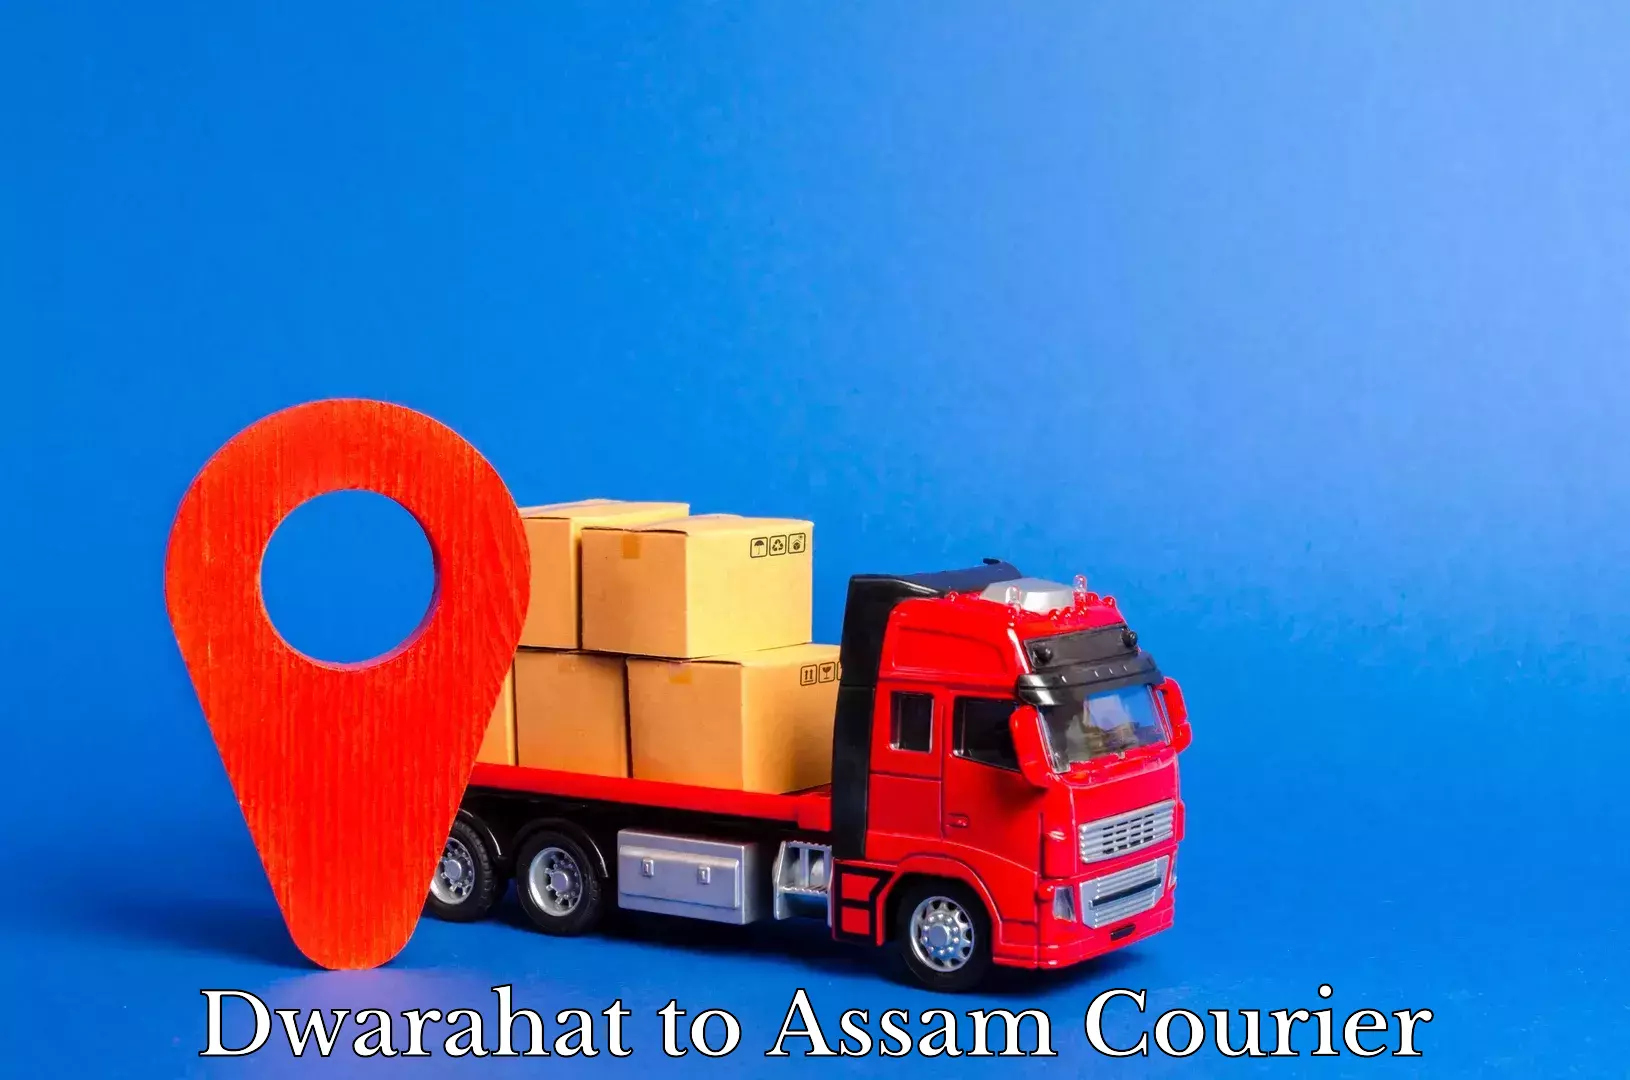 Express delivery capabilities Dwarahat to Assam